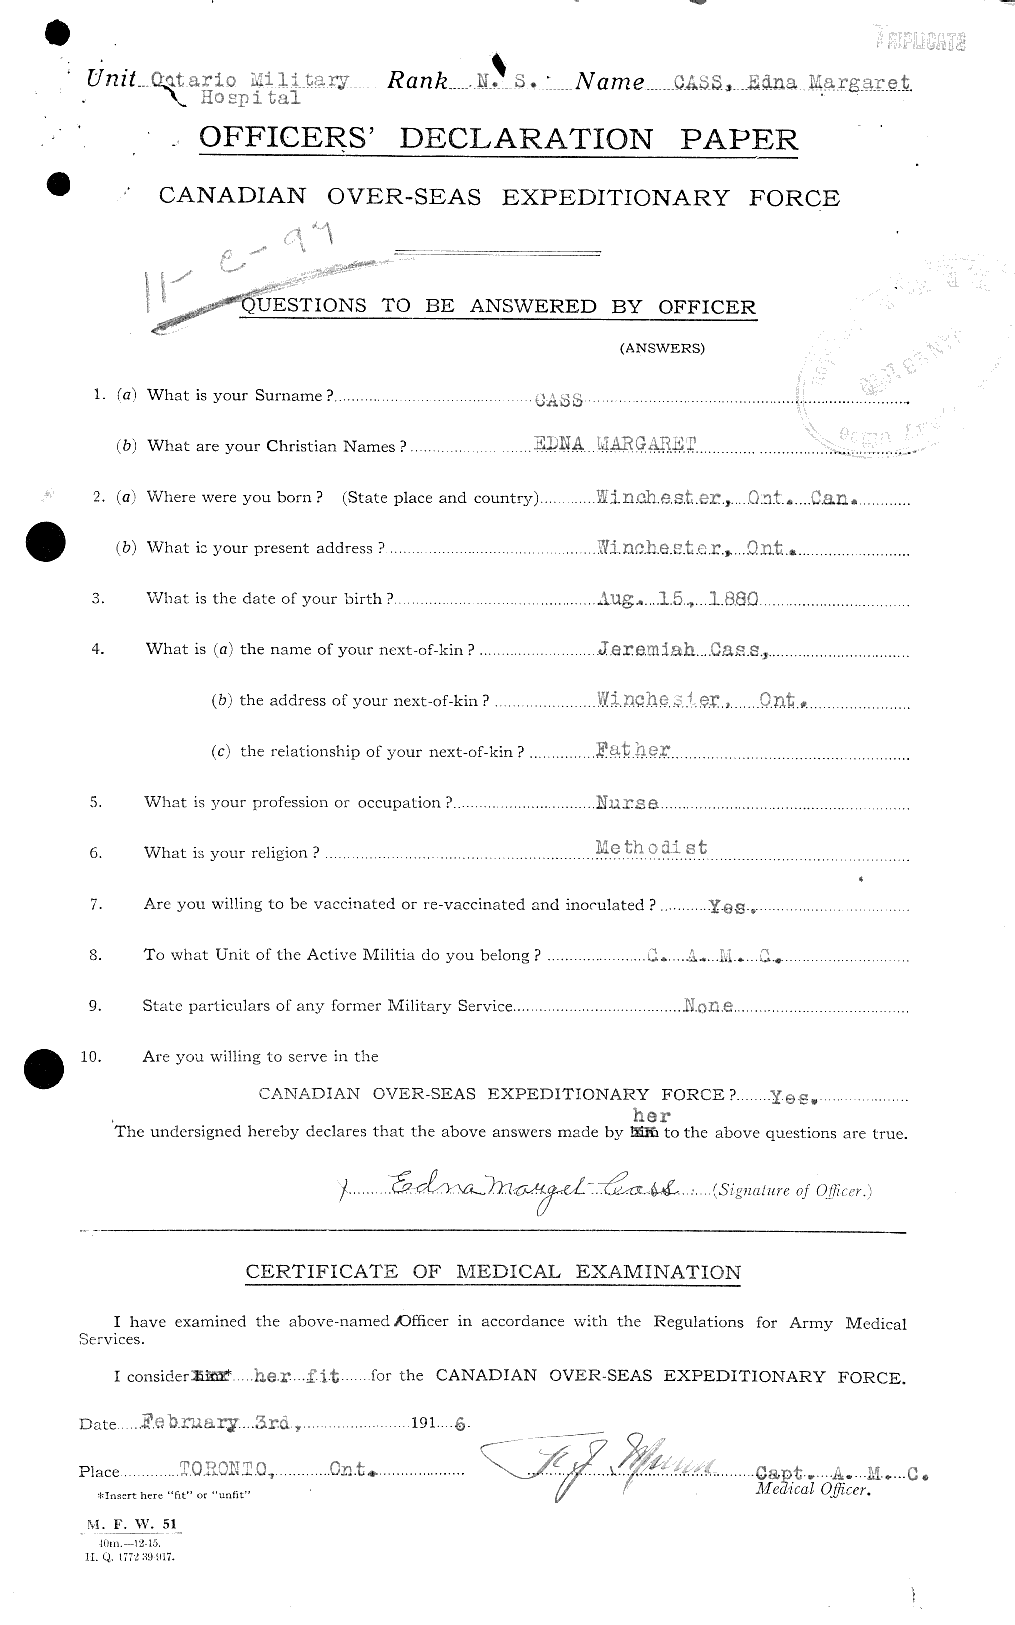 Personnel Records of the First World War - CEF 012849a